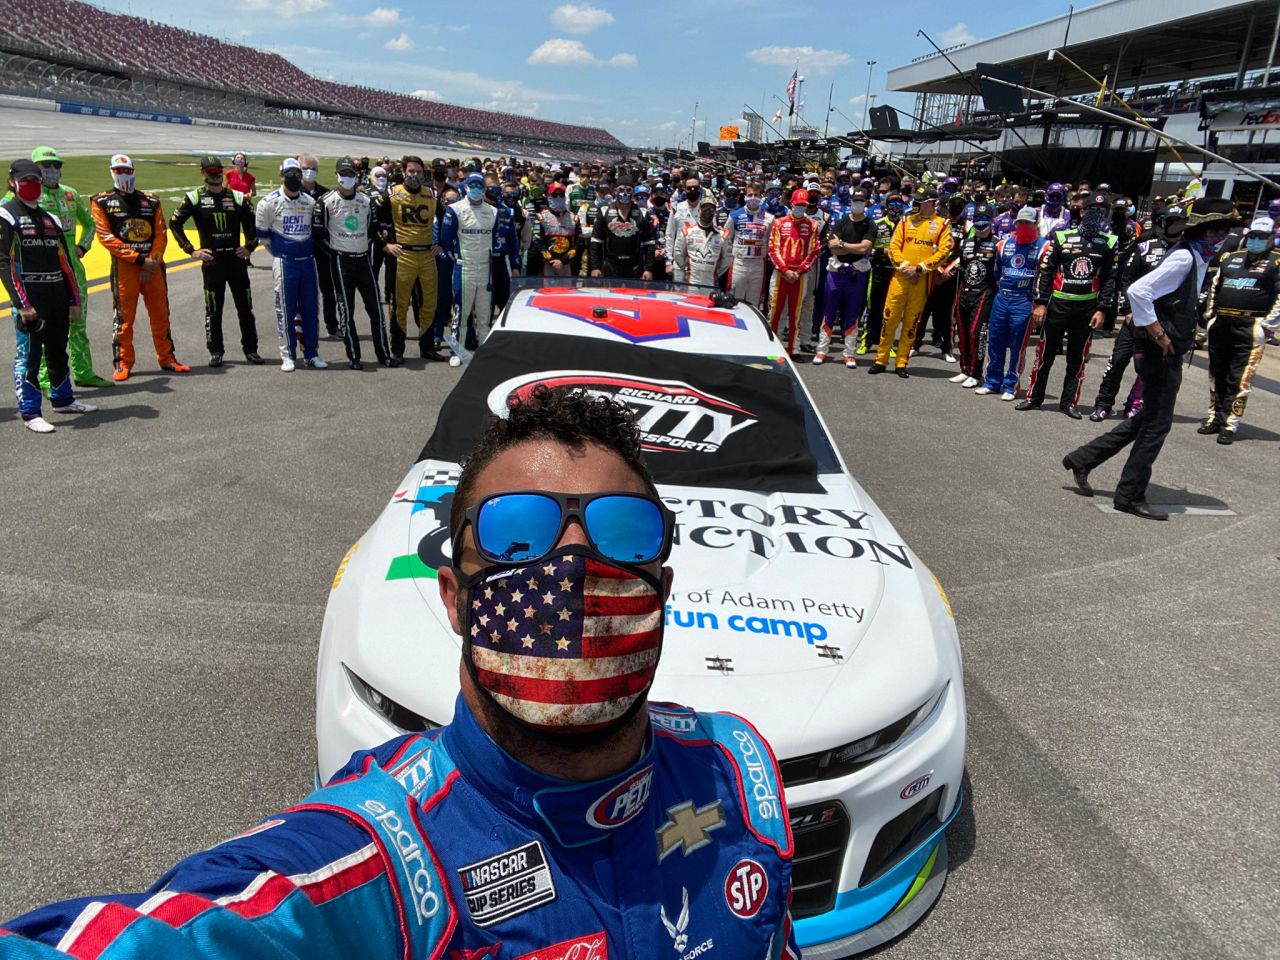 NASCAR driver Bubba Wallace <a href="https://twitter.com/BubbaWallace/status/1275141190824996864" target="_blank" target="_blank">tweeted this selfie</a> before a Cup Series race in Talladega, Alabama, on June 22. Fellow drivers and pit crew members <a href="https://www.cnn.com/2020/06/22/us/nascar-race-bubba-wallace-talladega/index.html" target="_blank">walked alongside Wallace's car</a> to show their support for him. Wallace, the only Black driver in NASCAR's top circuit, has been an outspoken advocate of the Black Lives Matter movement. 